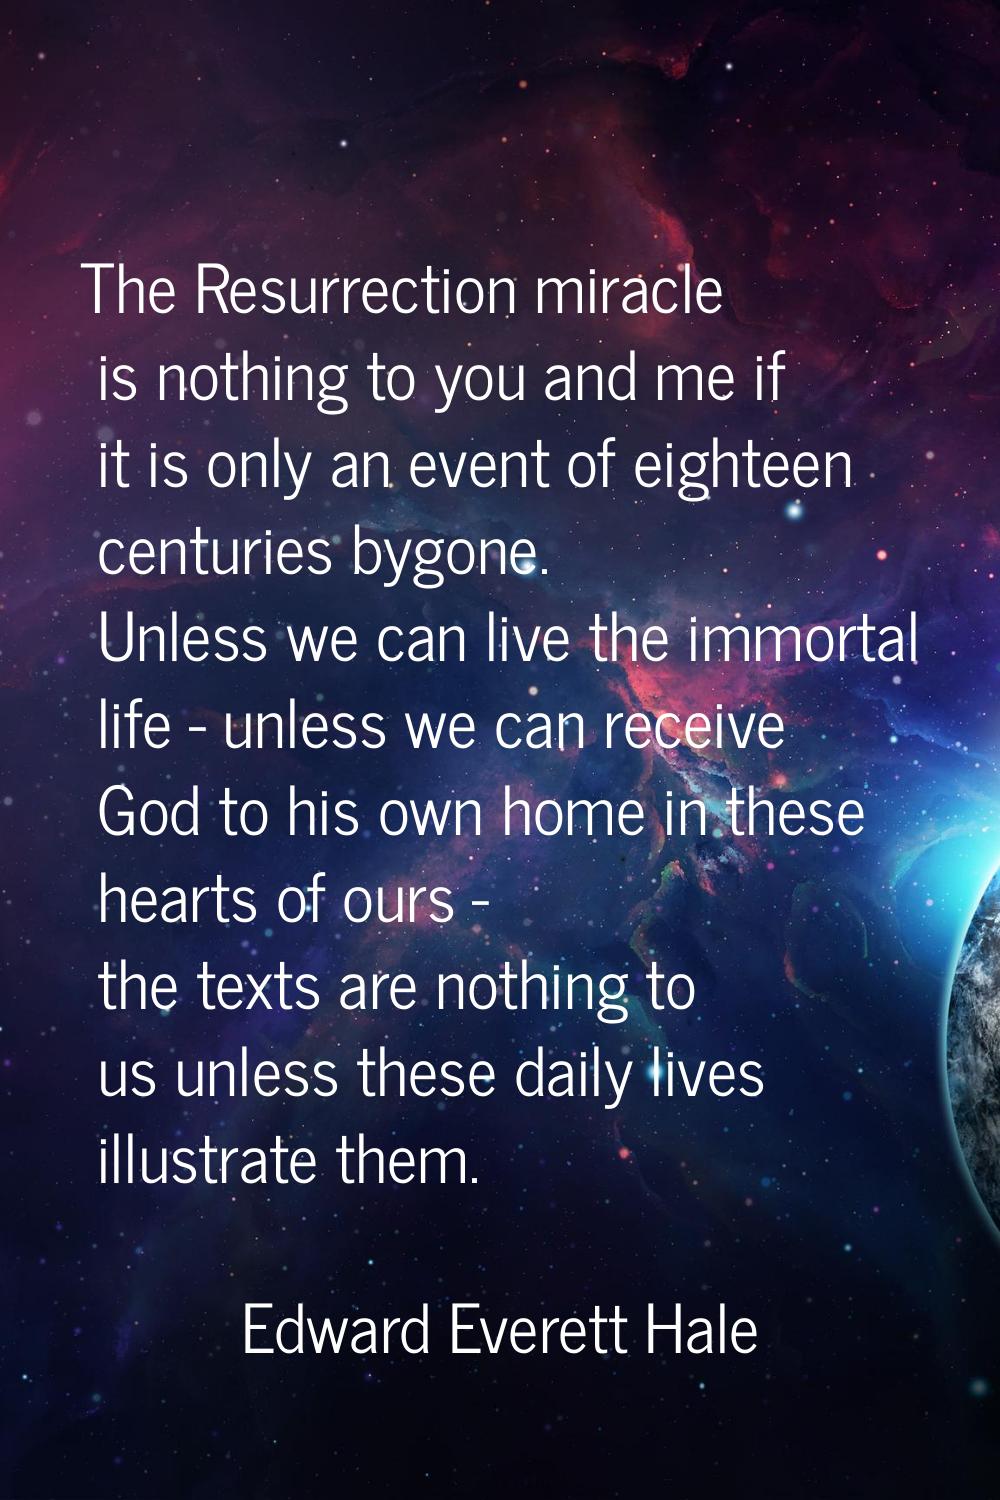 The Resurrection miracle is nothing to you and me if it is only an event of eighteen centuries bygo